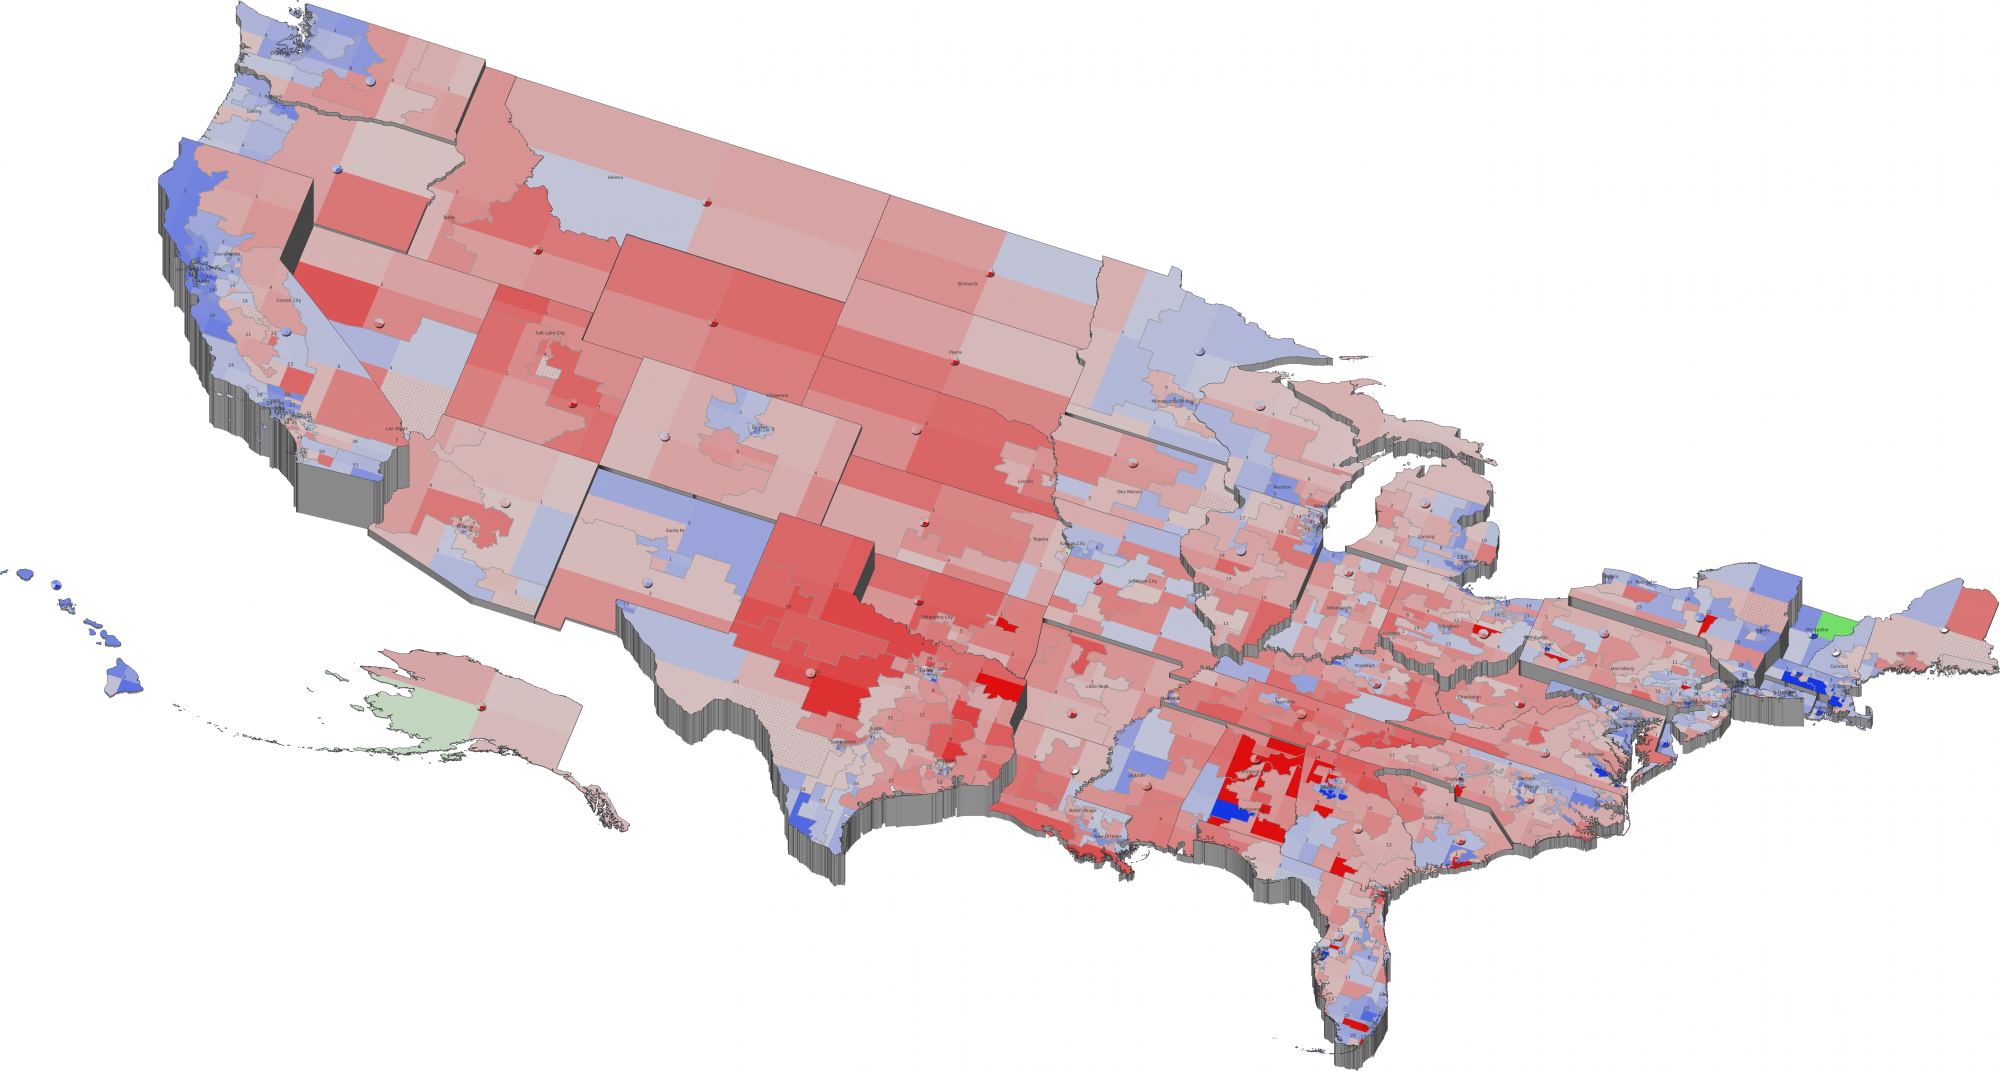 An example of a perceptually-motivated multidimensional visualization of recent U.S. election results.